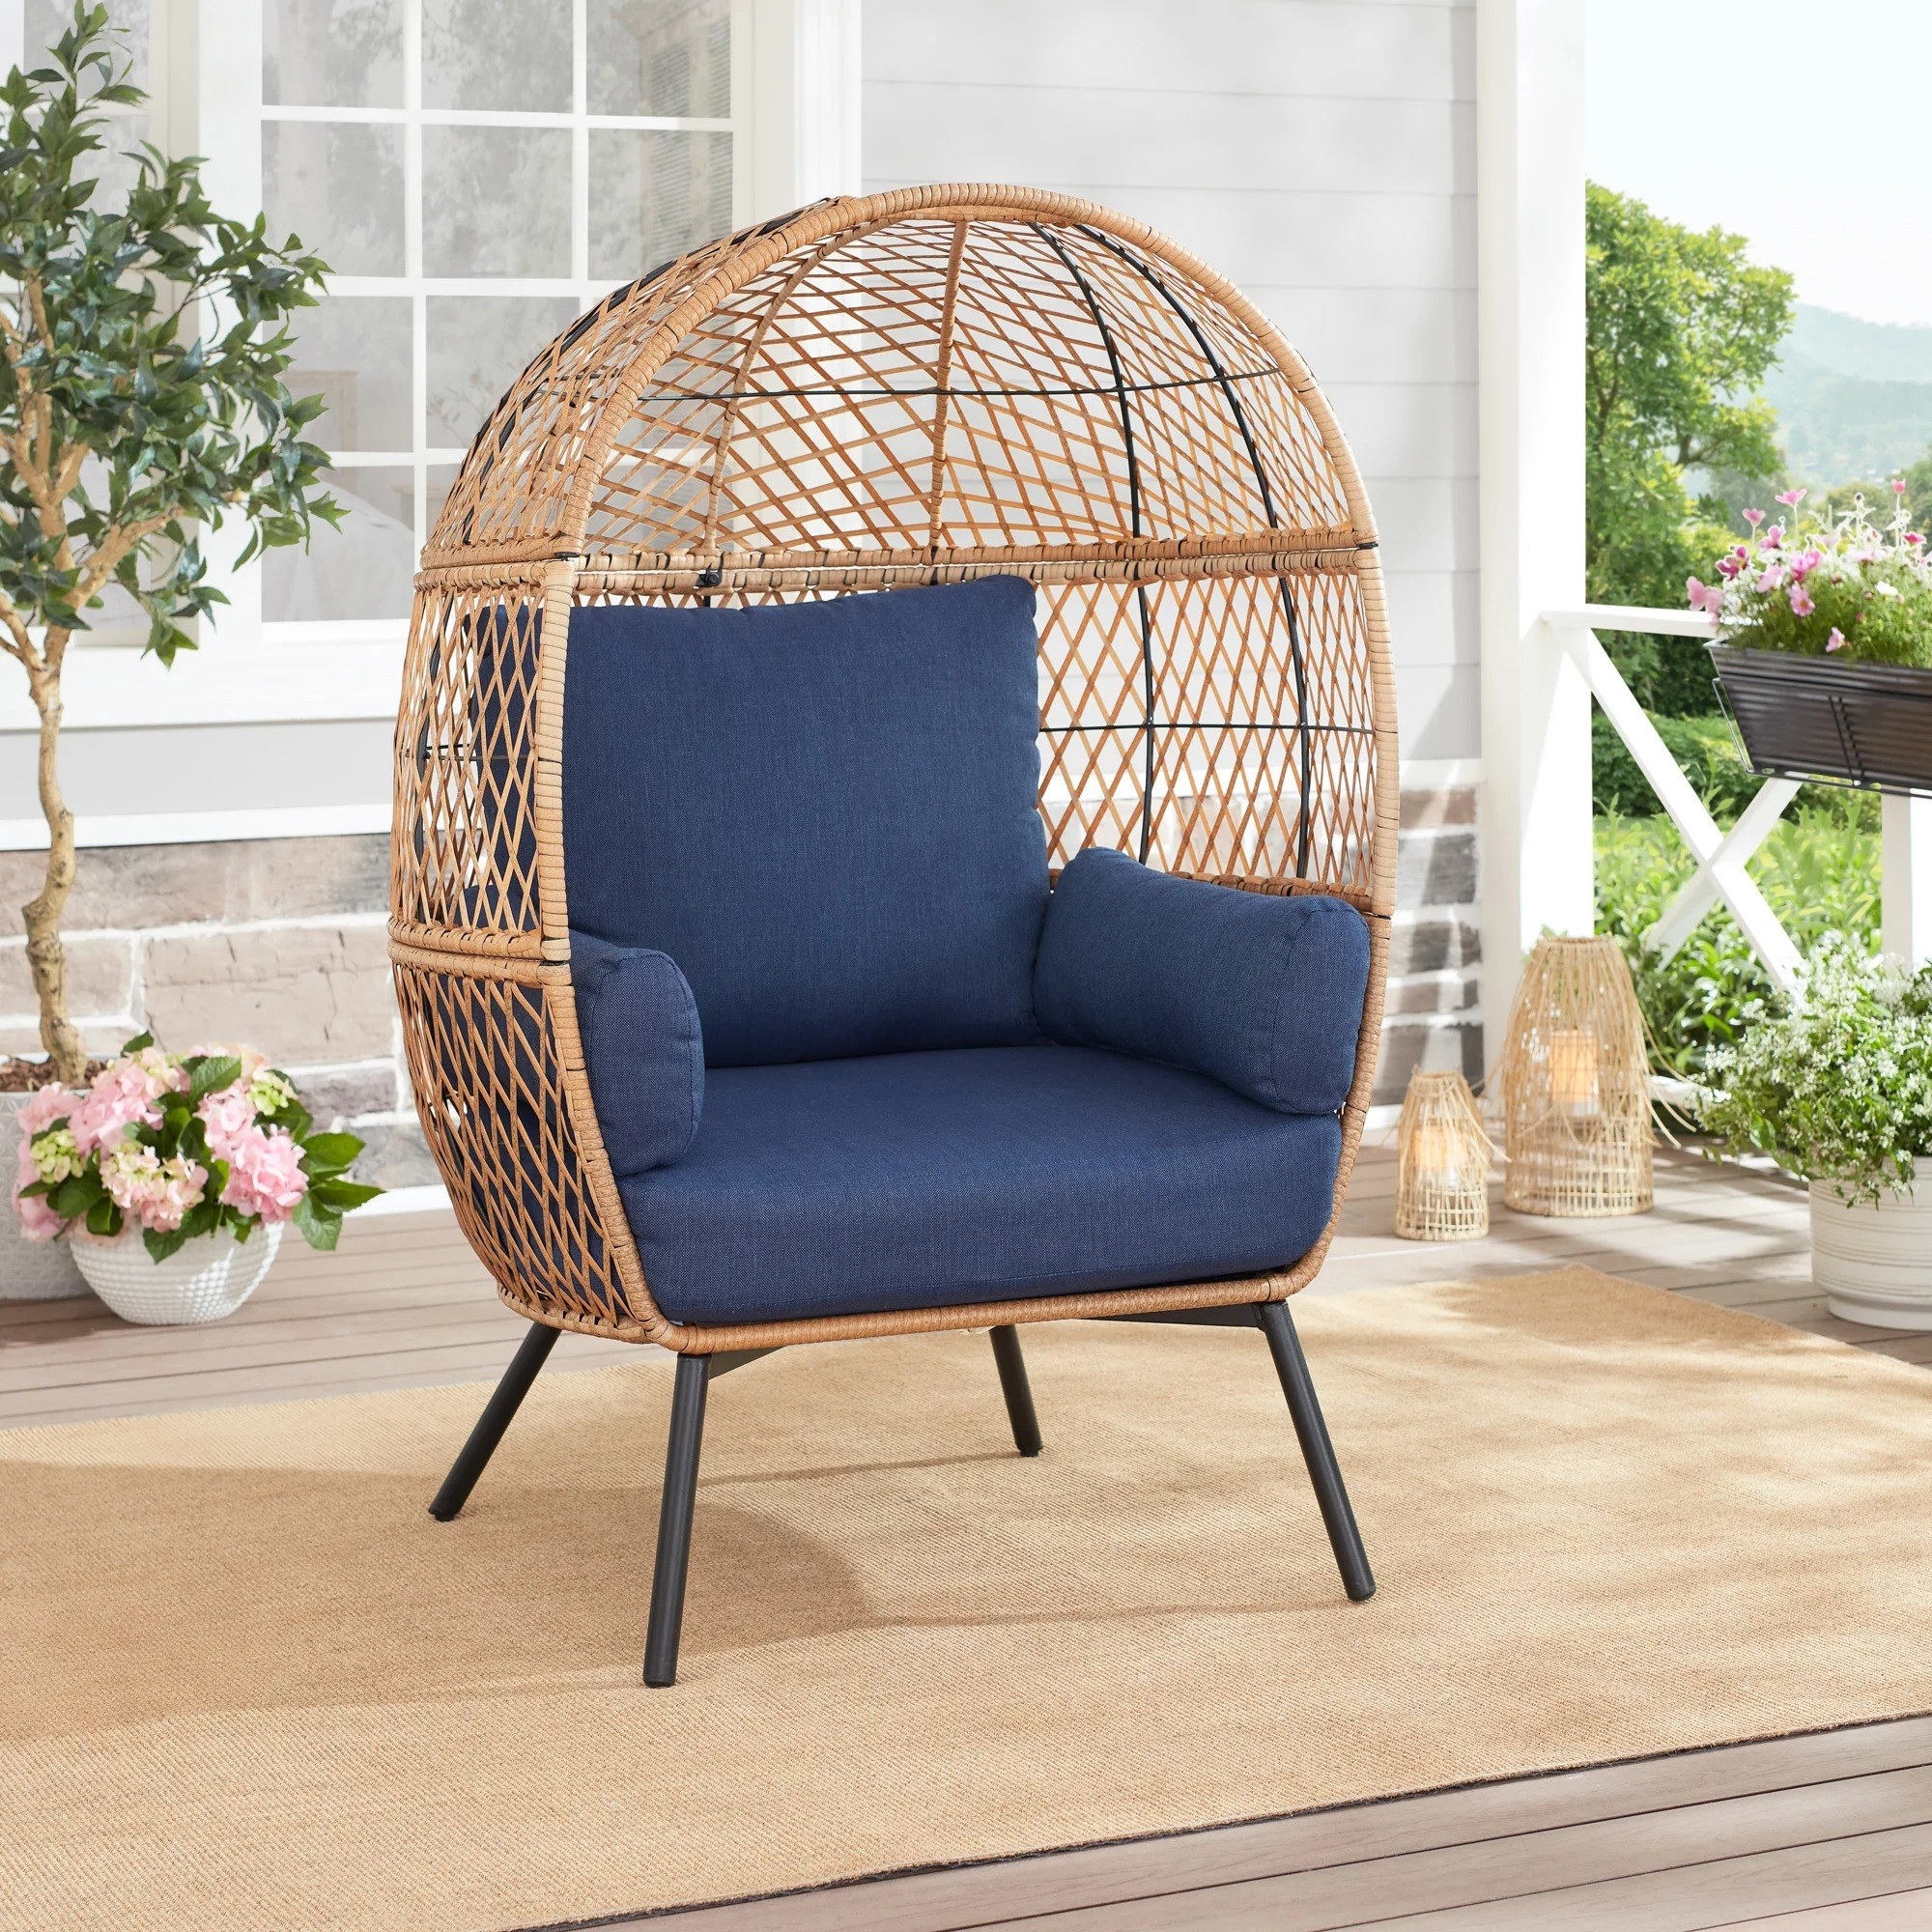 the egg chair with navy cushions